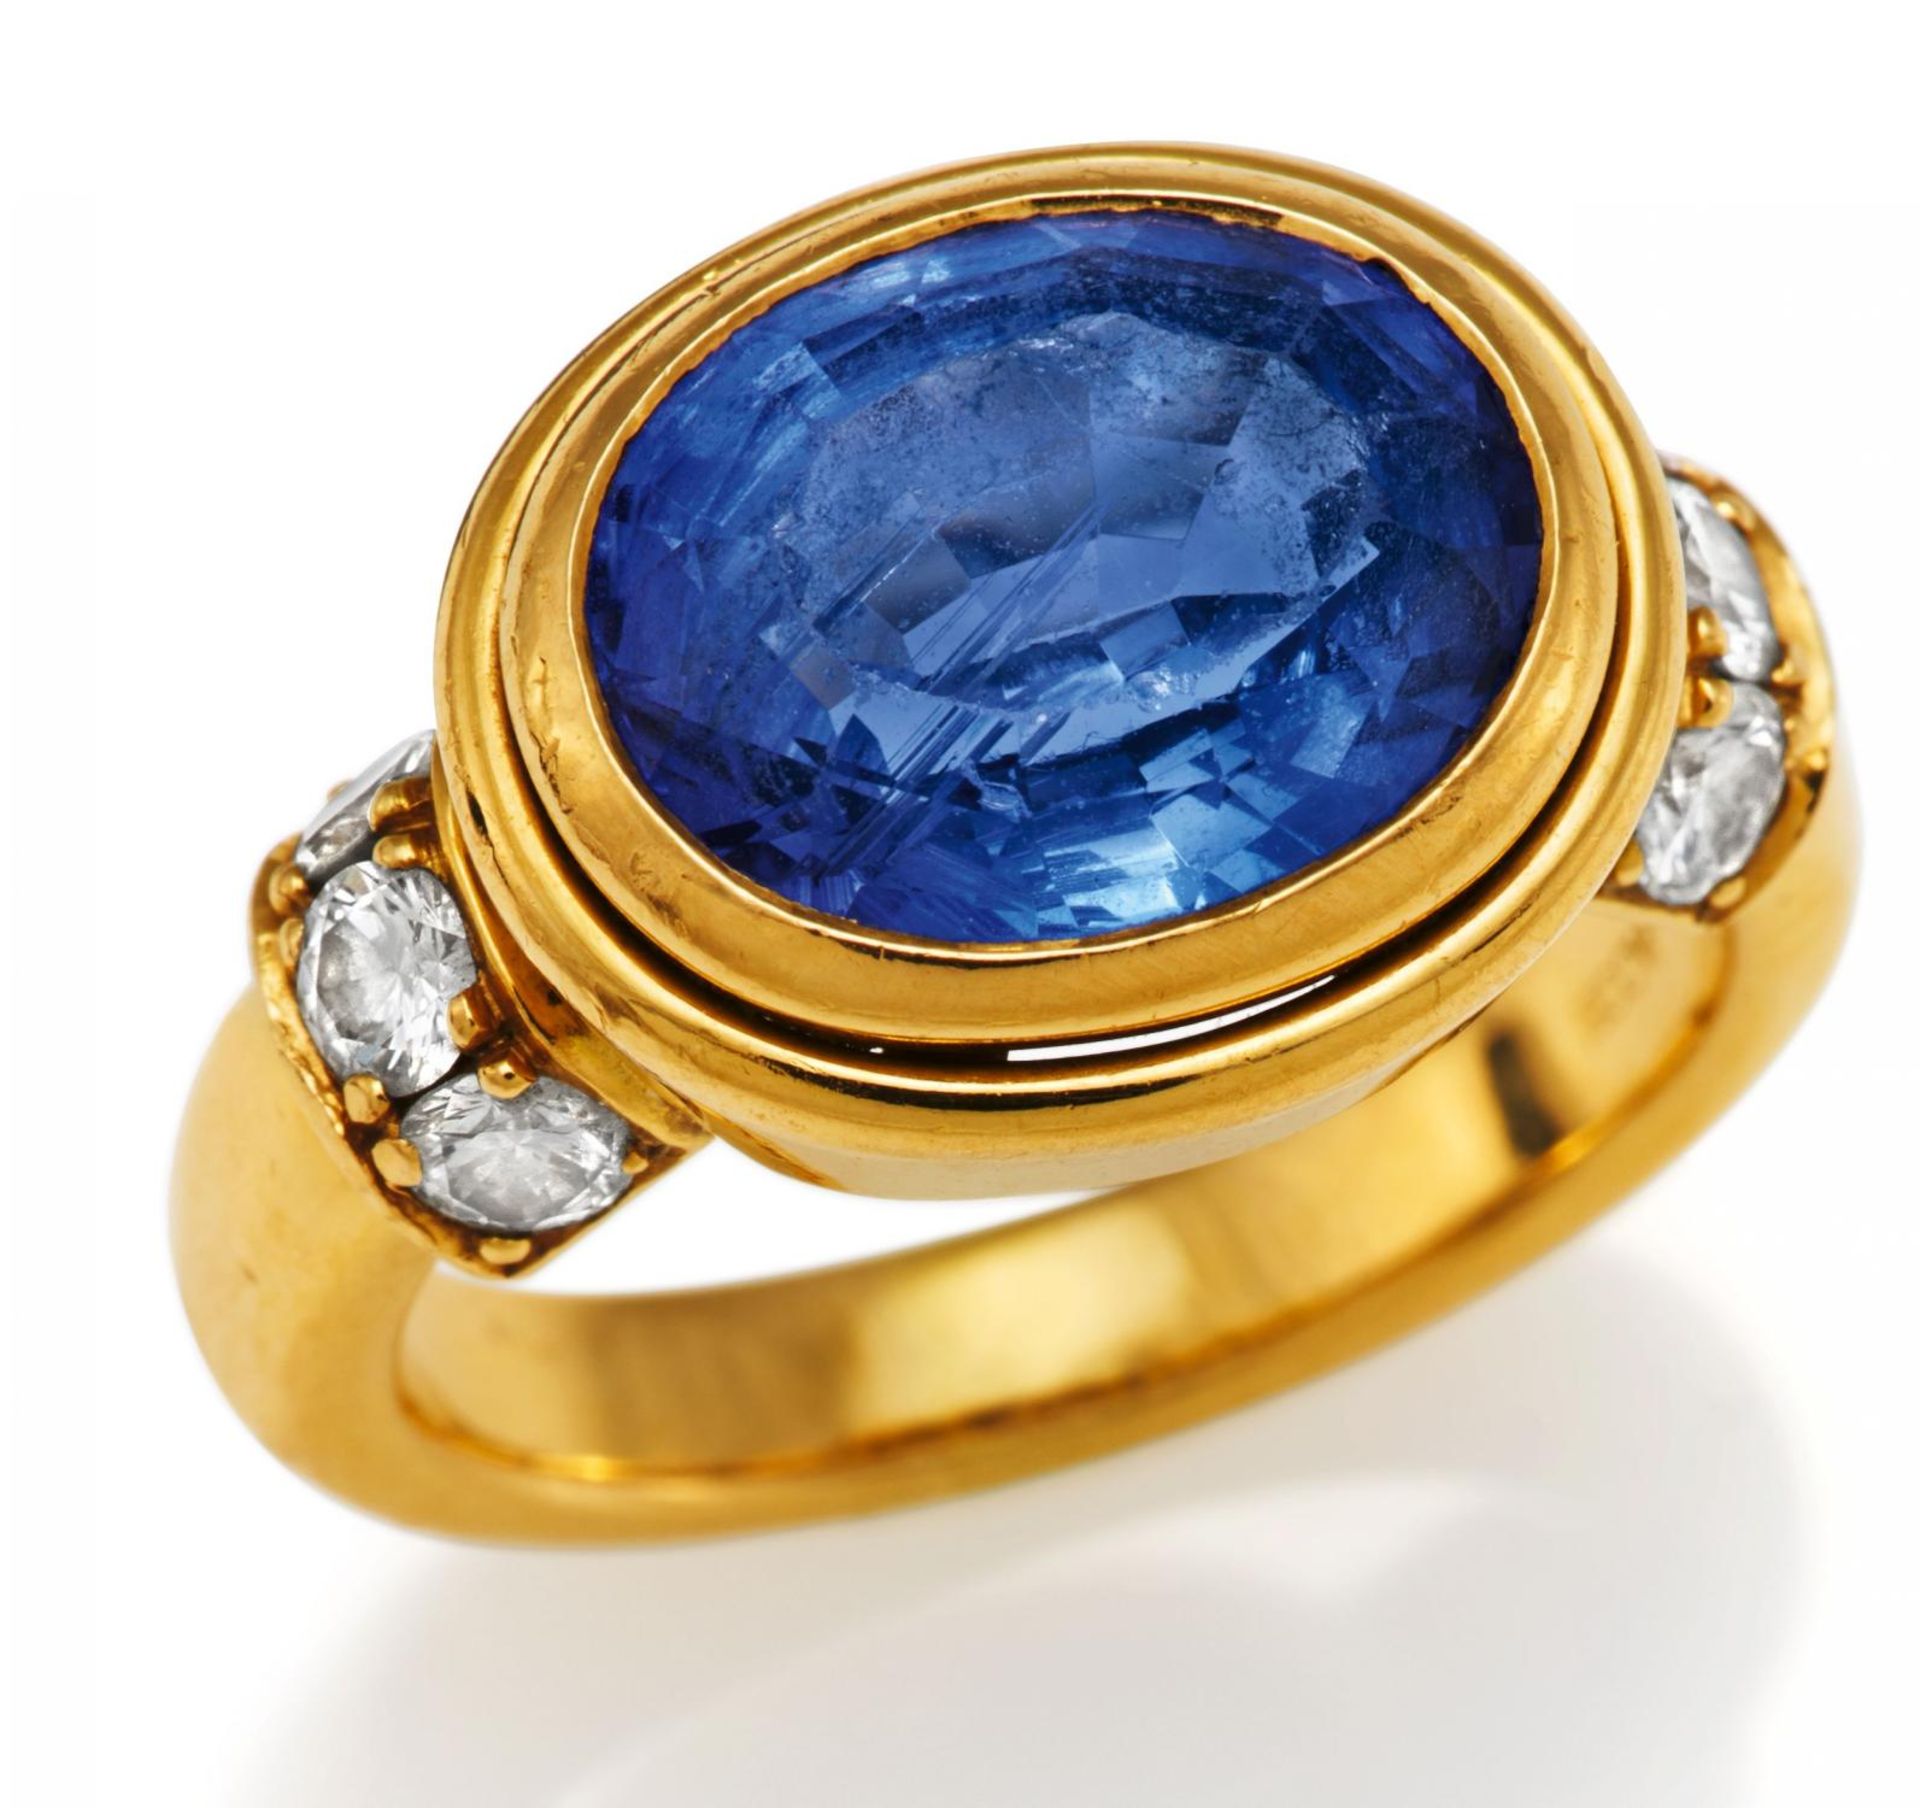 JACOBITansanite-Diamond-Ring. Origin: Germany. Material: 750/- yellow gold, with mark. Total Weight: